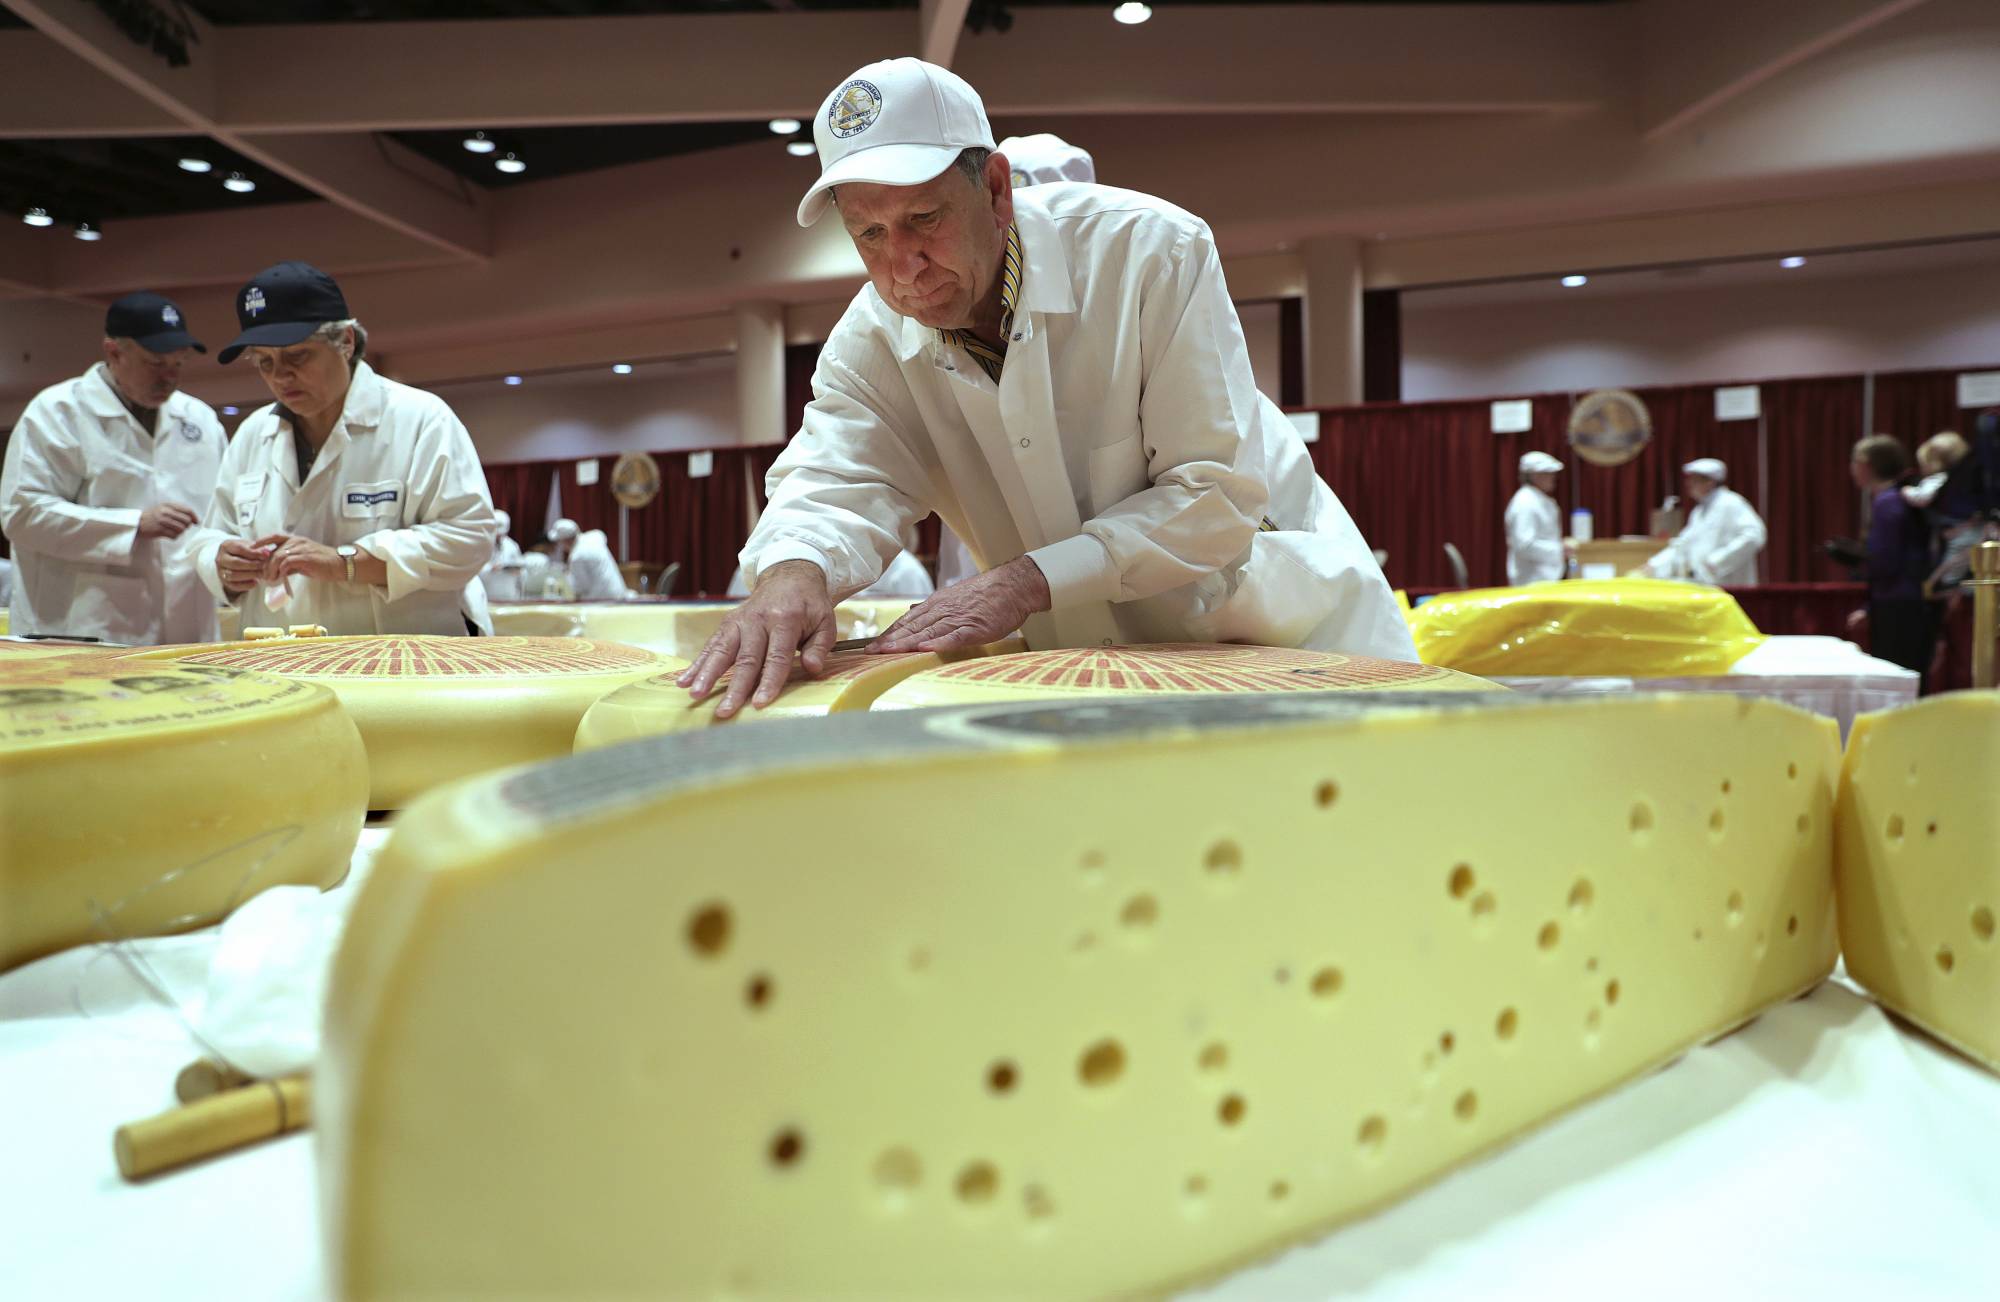 Christophe Megevand, of Schuman Cheese, New Jersey, judges the Rhined Swiss Style Cheese category in the opening day of the World Championship Cheese Contest at the Monona Terrace in Madison, Wis., Tuesday, March 6, 2018. (Steve Apps/Wisconsin State Journal via AP)